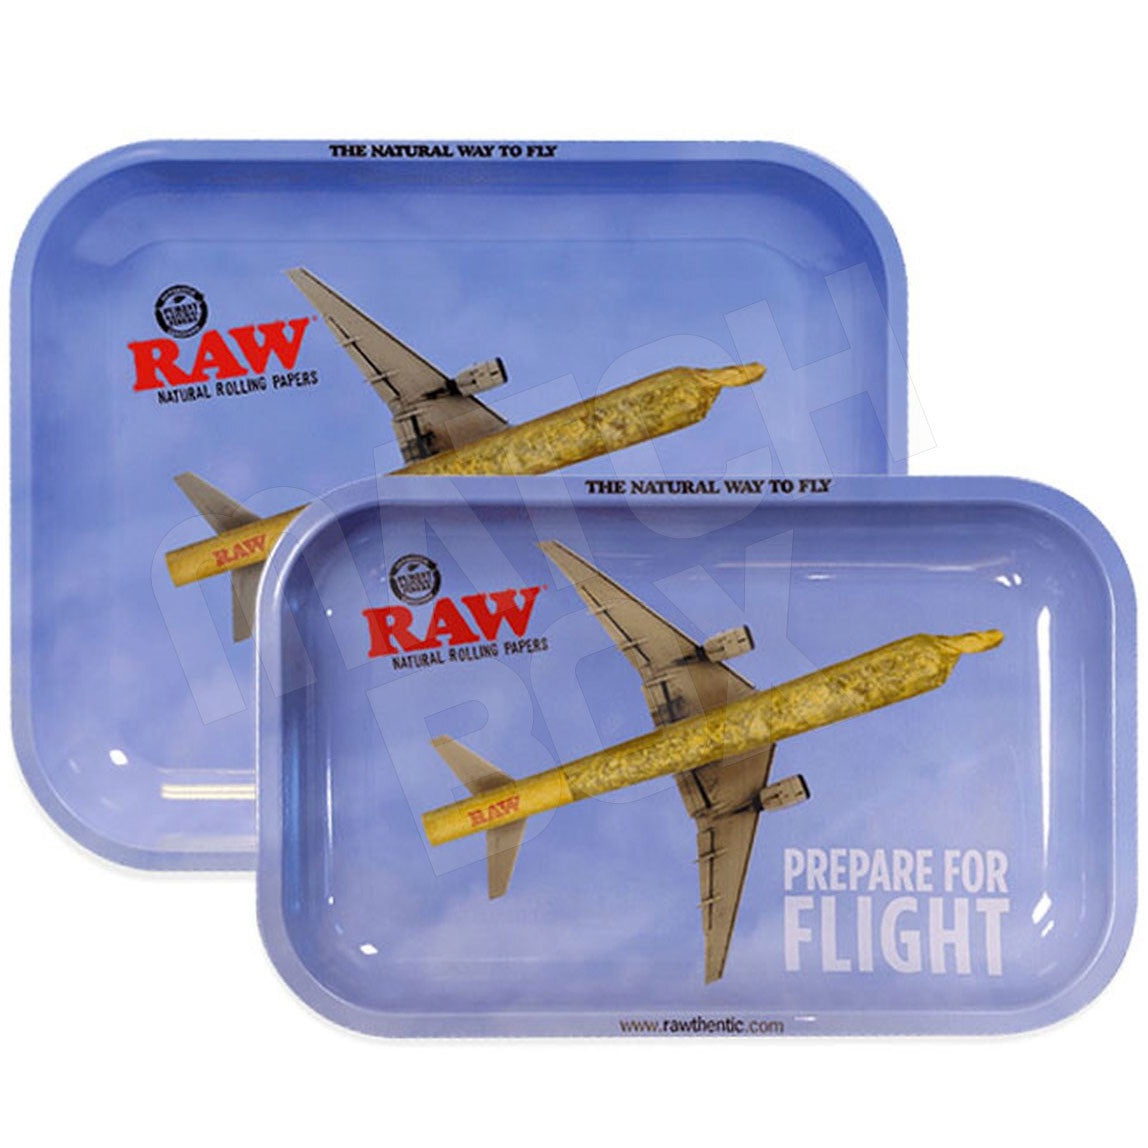 RAW Tray Prepare for Flight LARGE AND SMALL